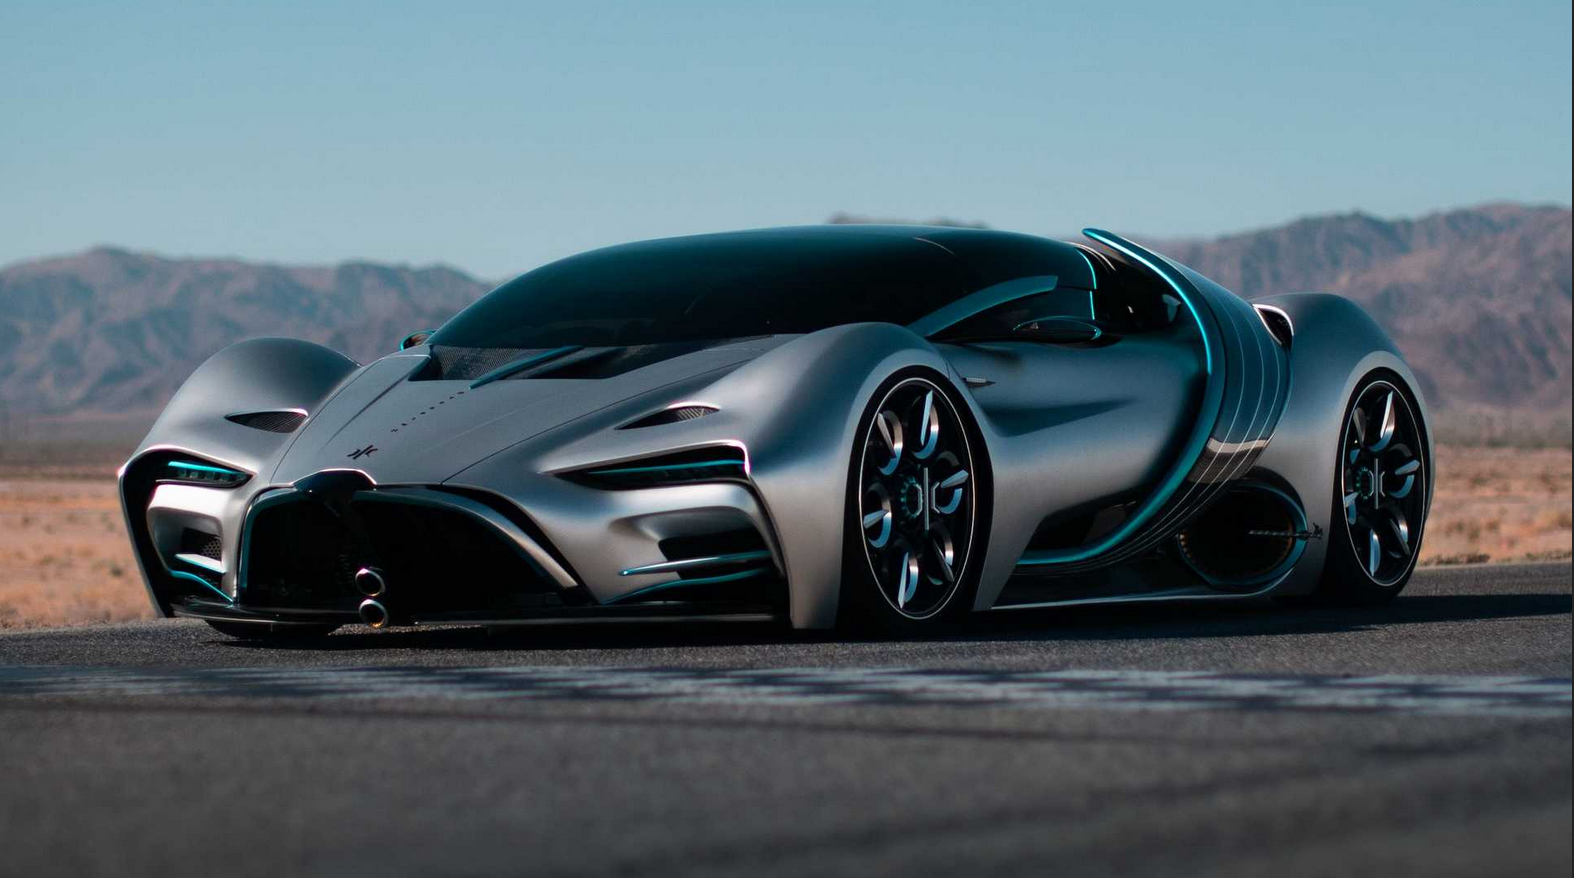 Hyperion XP-1 supercar: ‘hydrogen message through a product’